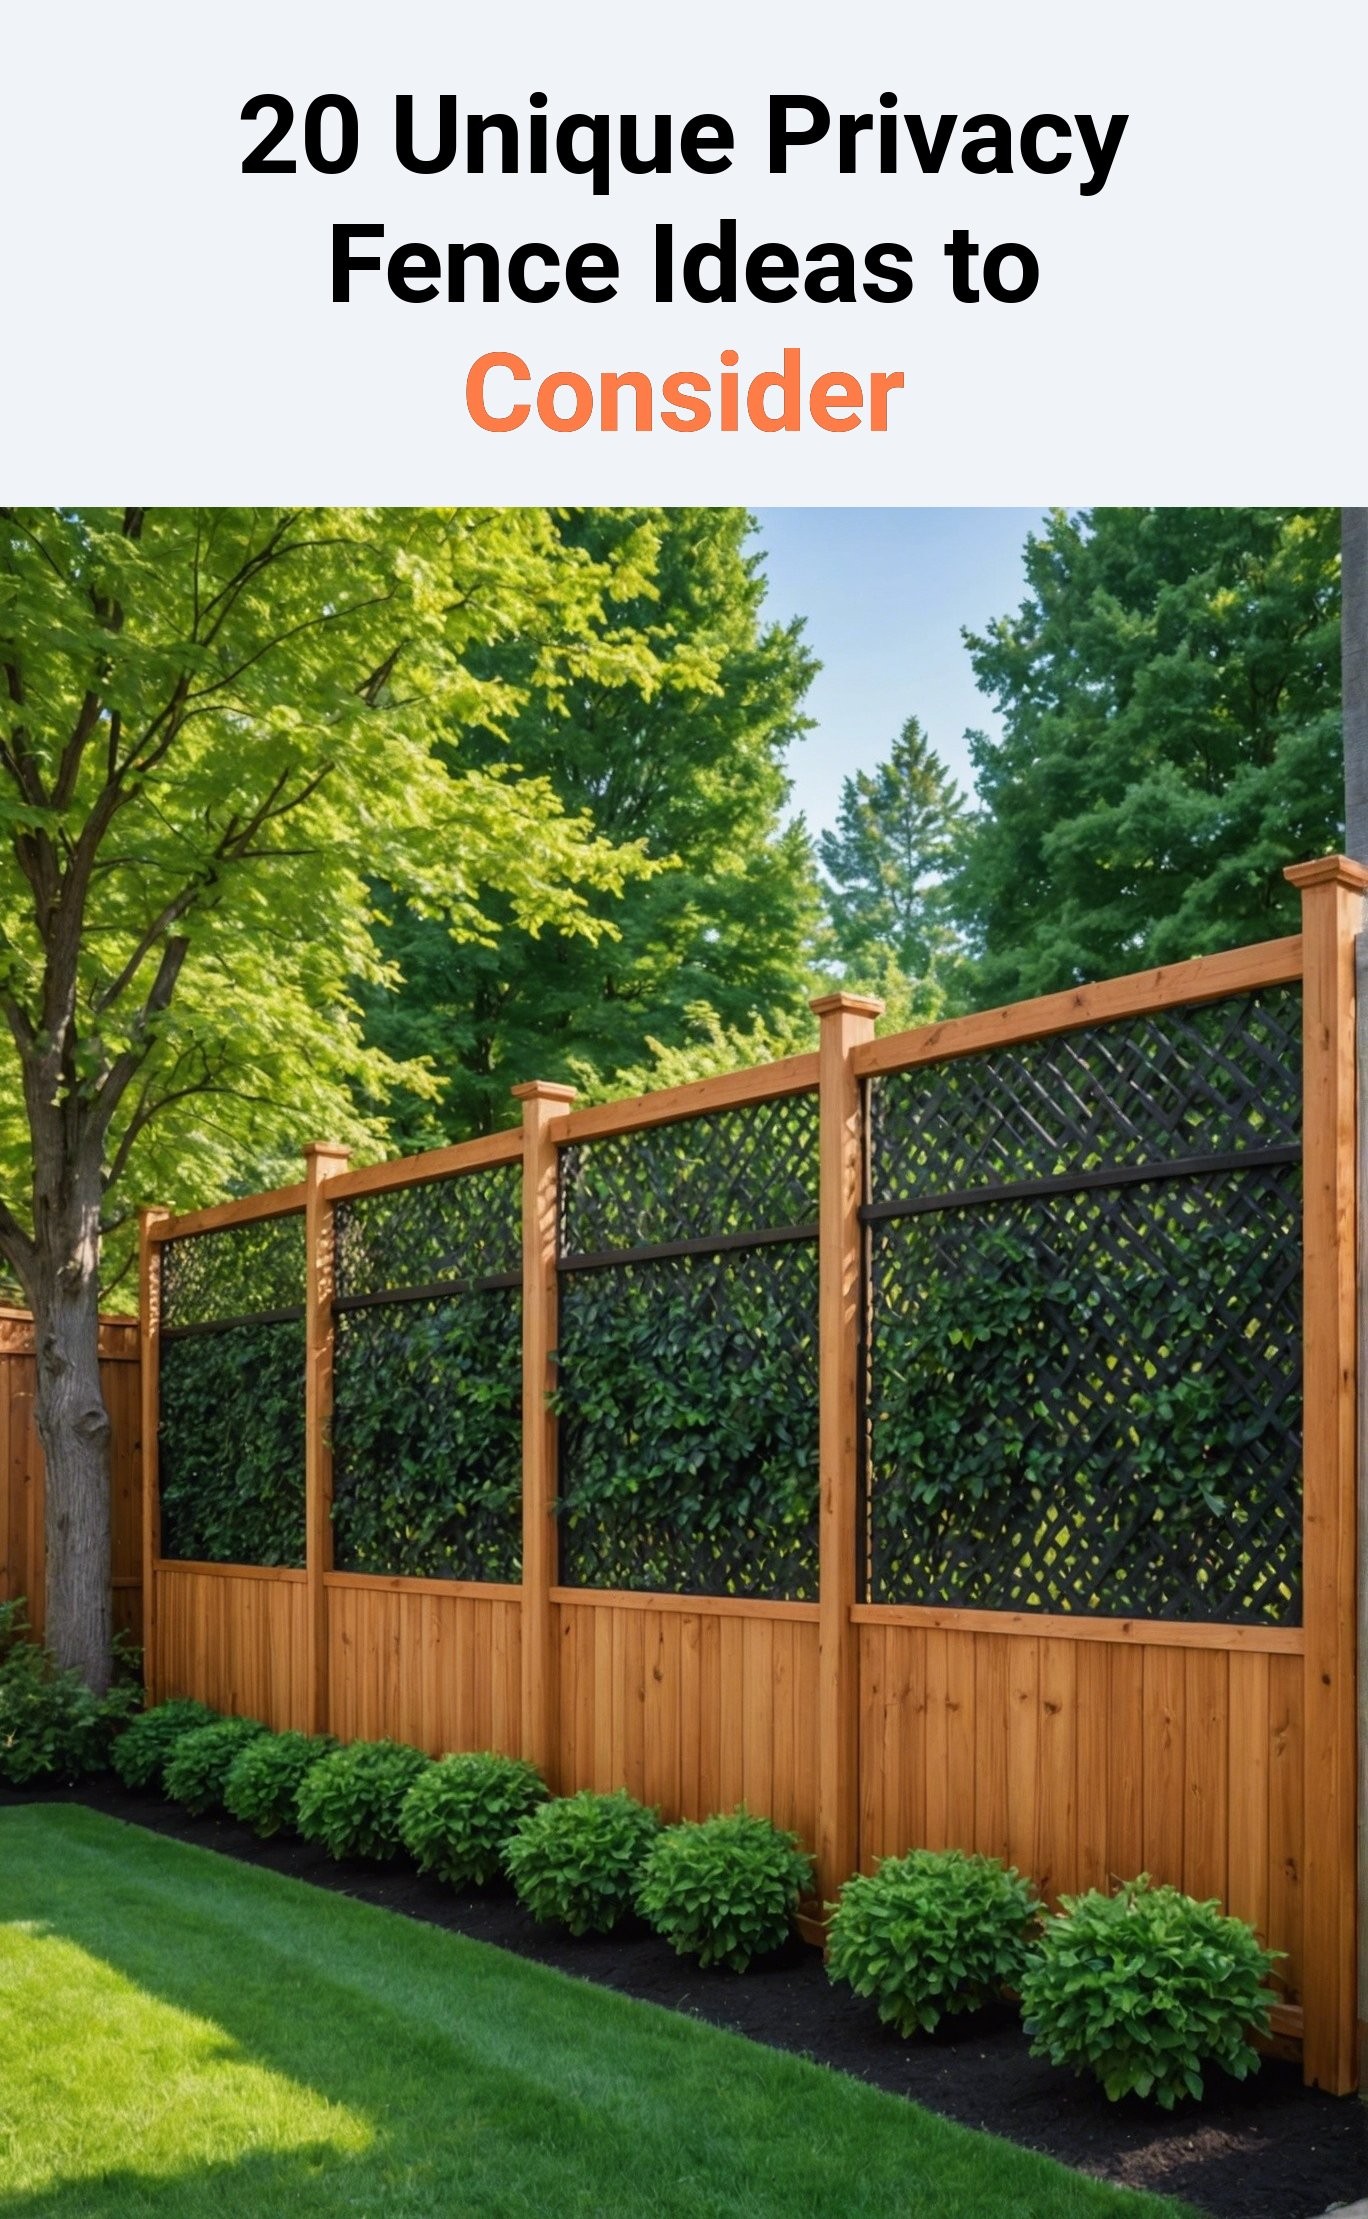 20 Unique Privacy Fence Ideas to Consider